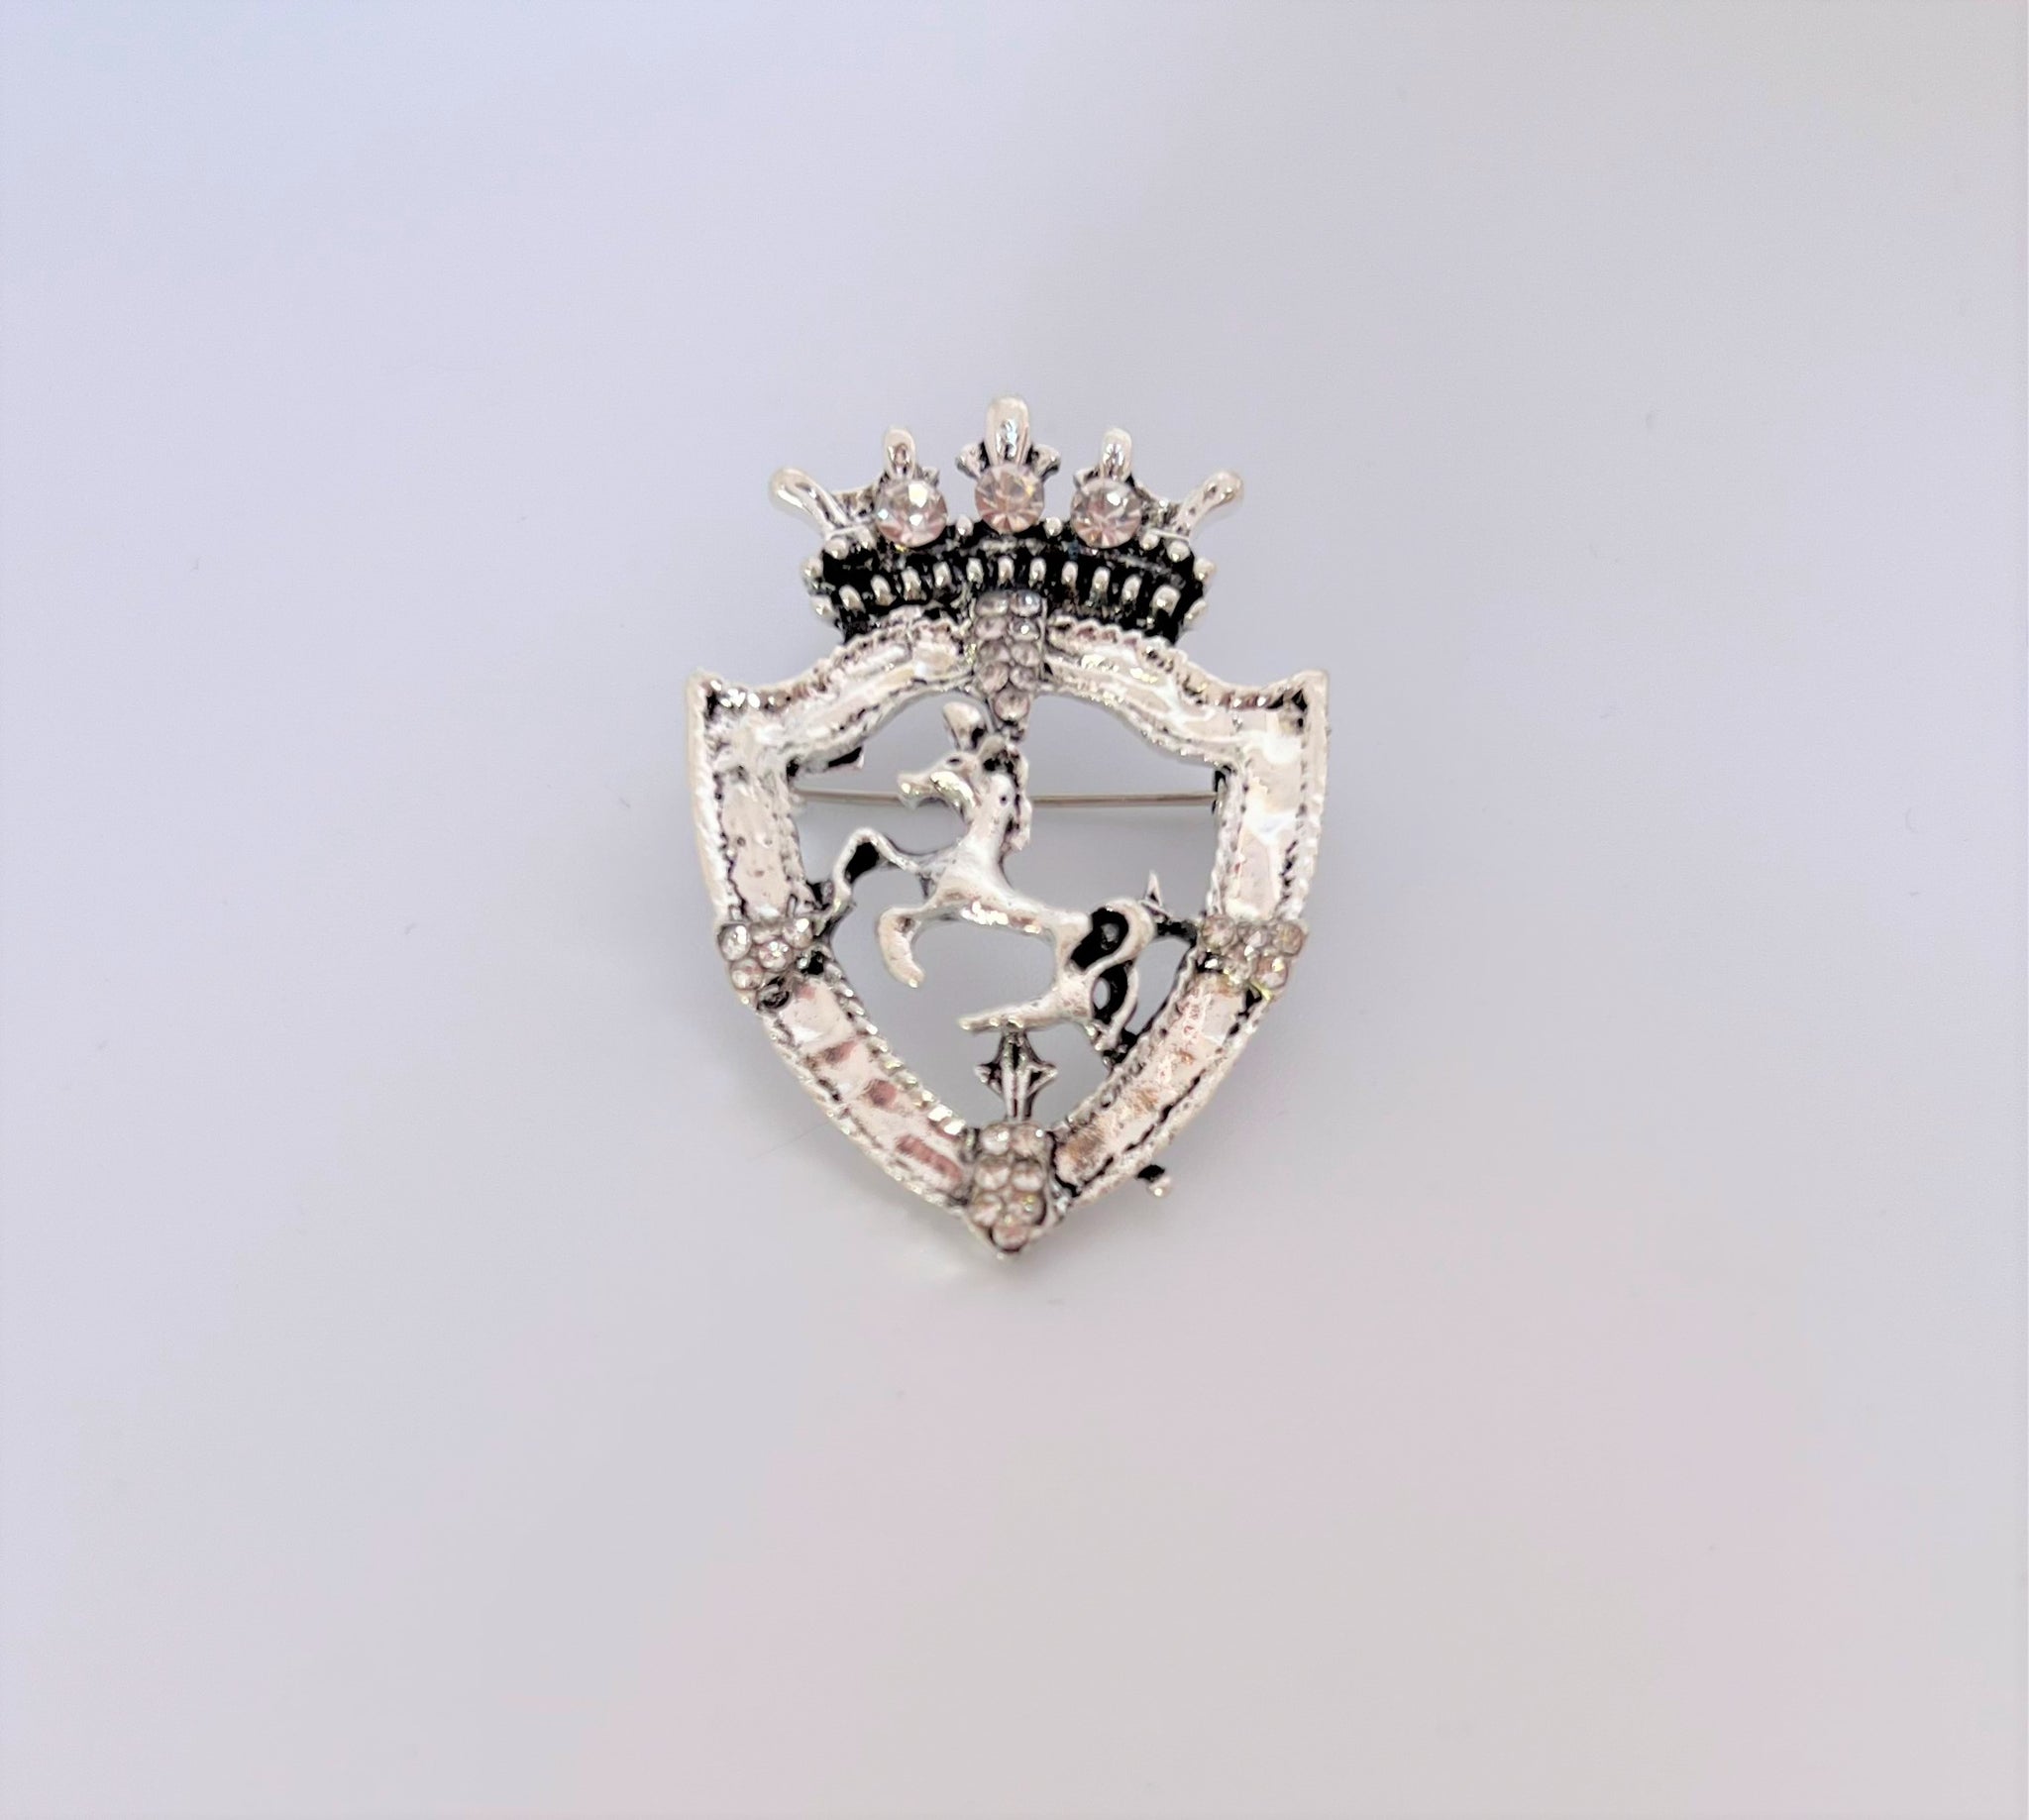 Silver Alloy Crown Horse Show Brooch